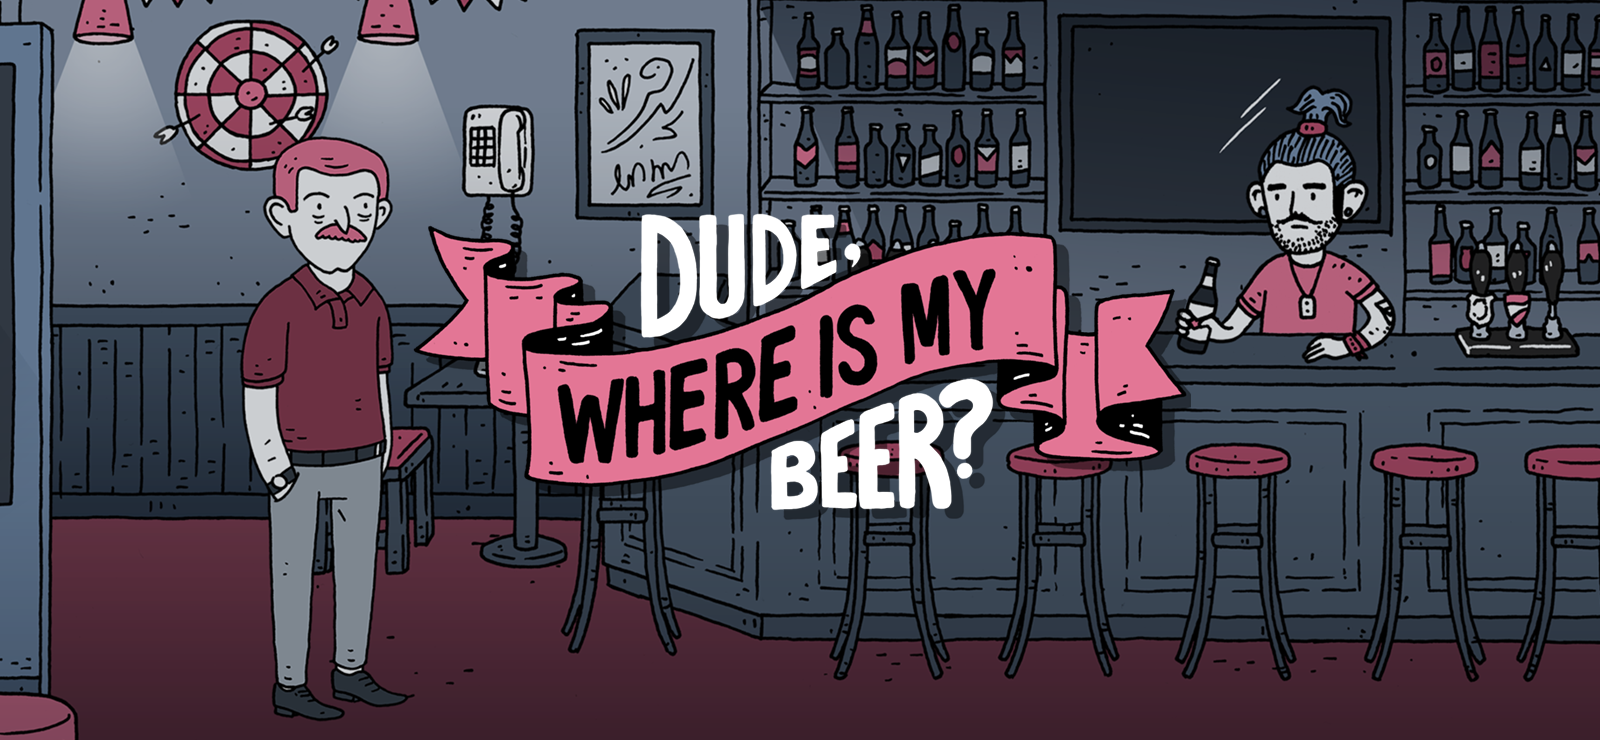 Dude, Where Is My Beer? - Illustrated Walkthrough